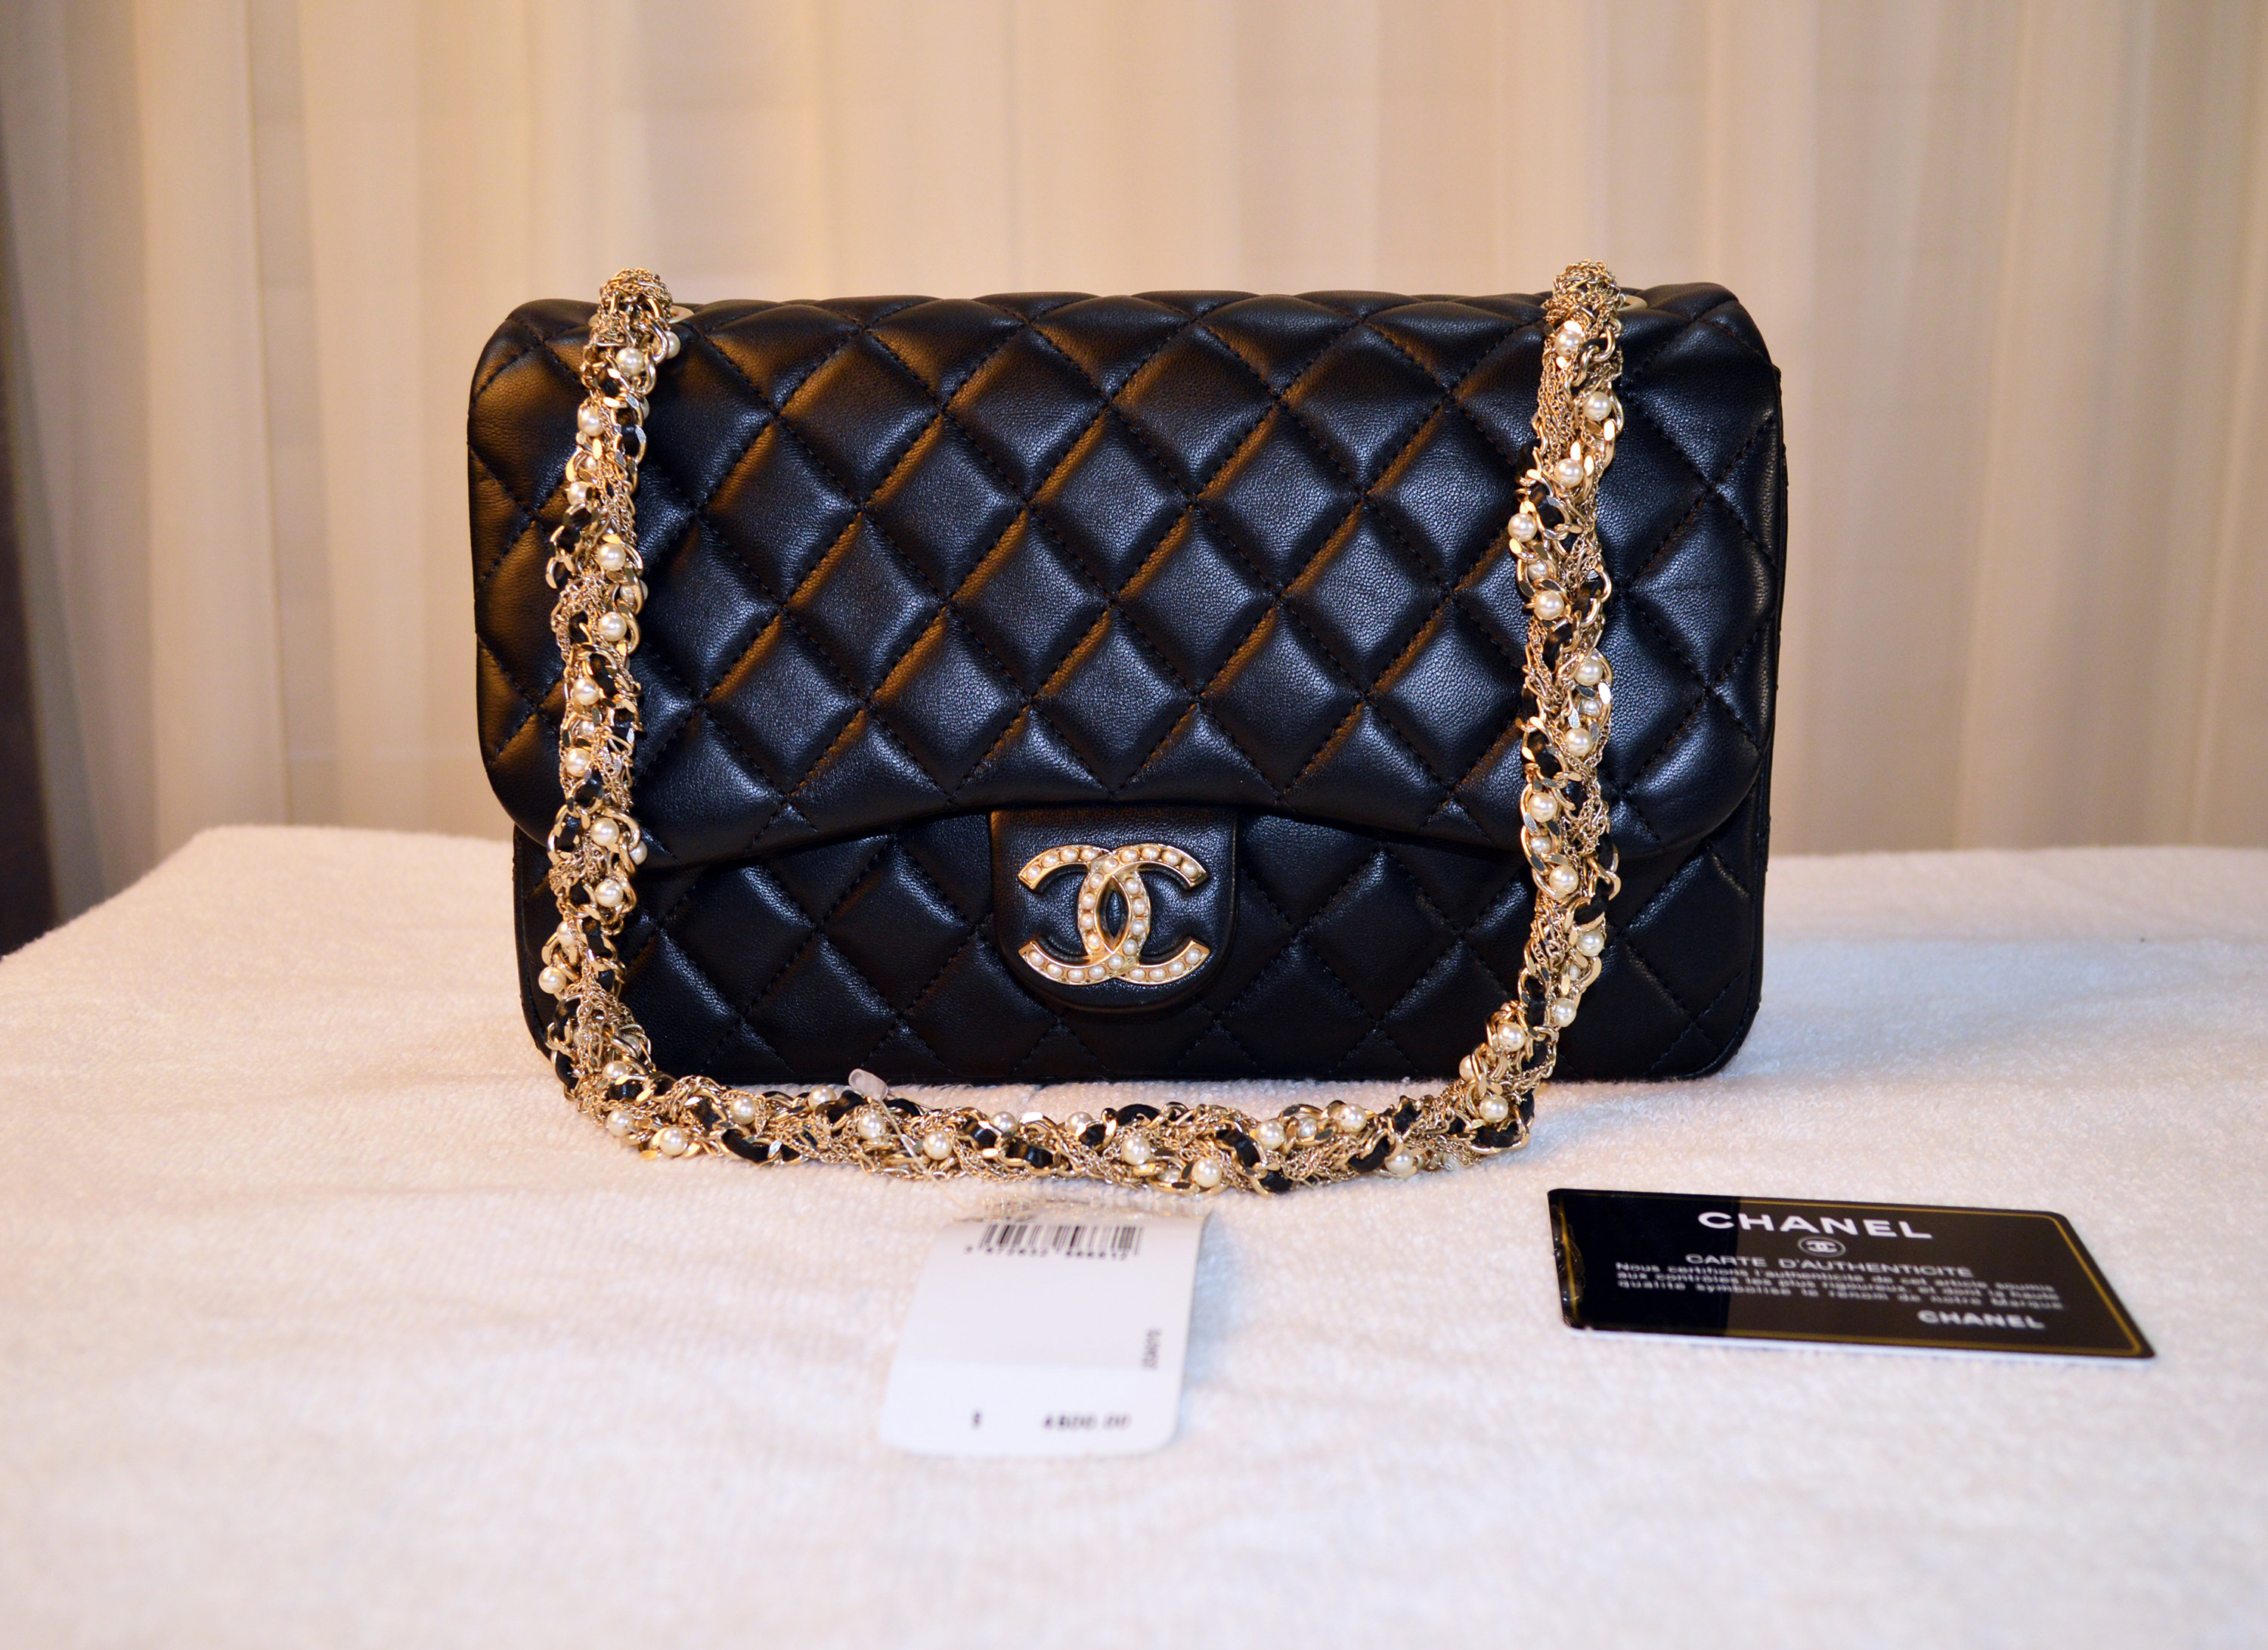 Chanel Medium Westminster Flap Bag with Pearls